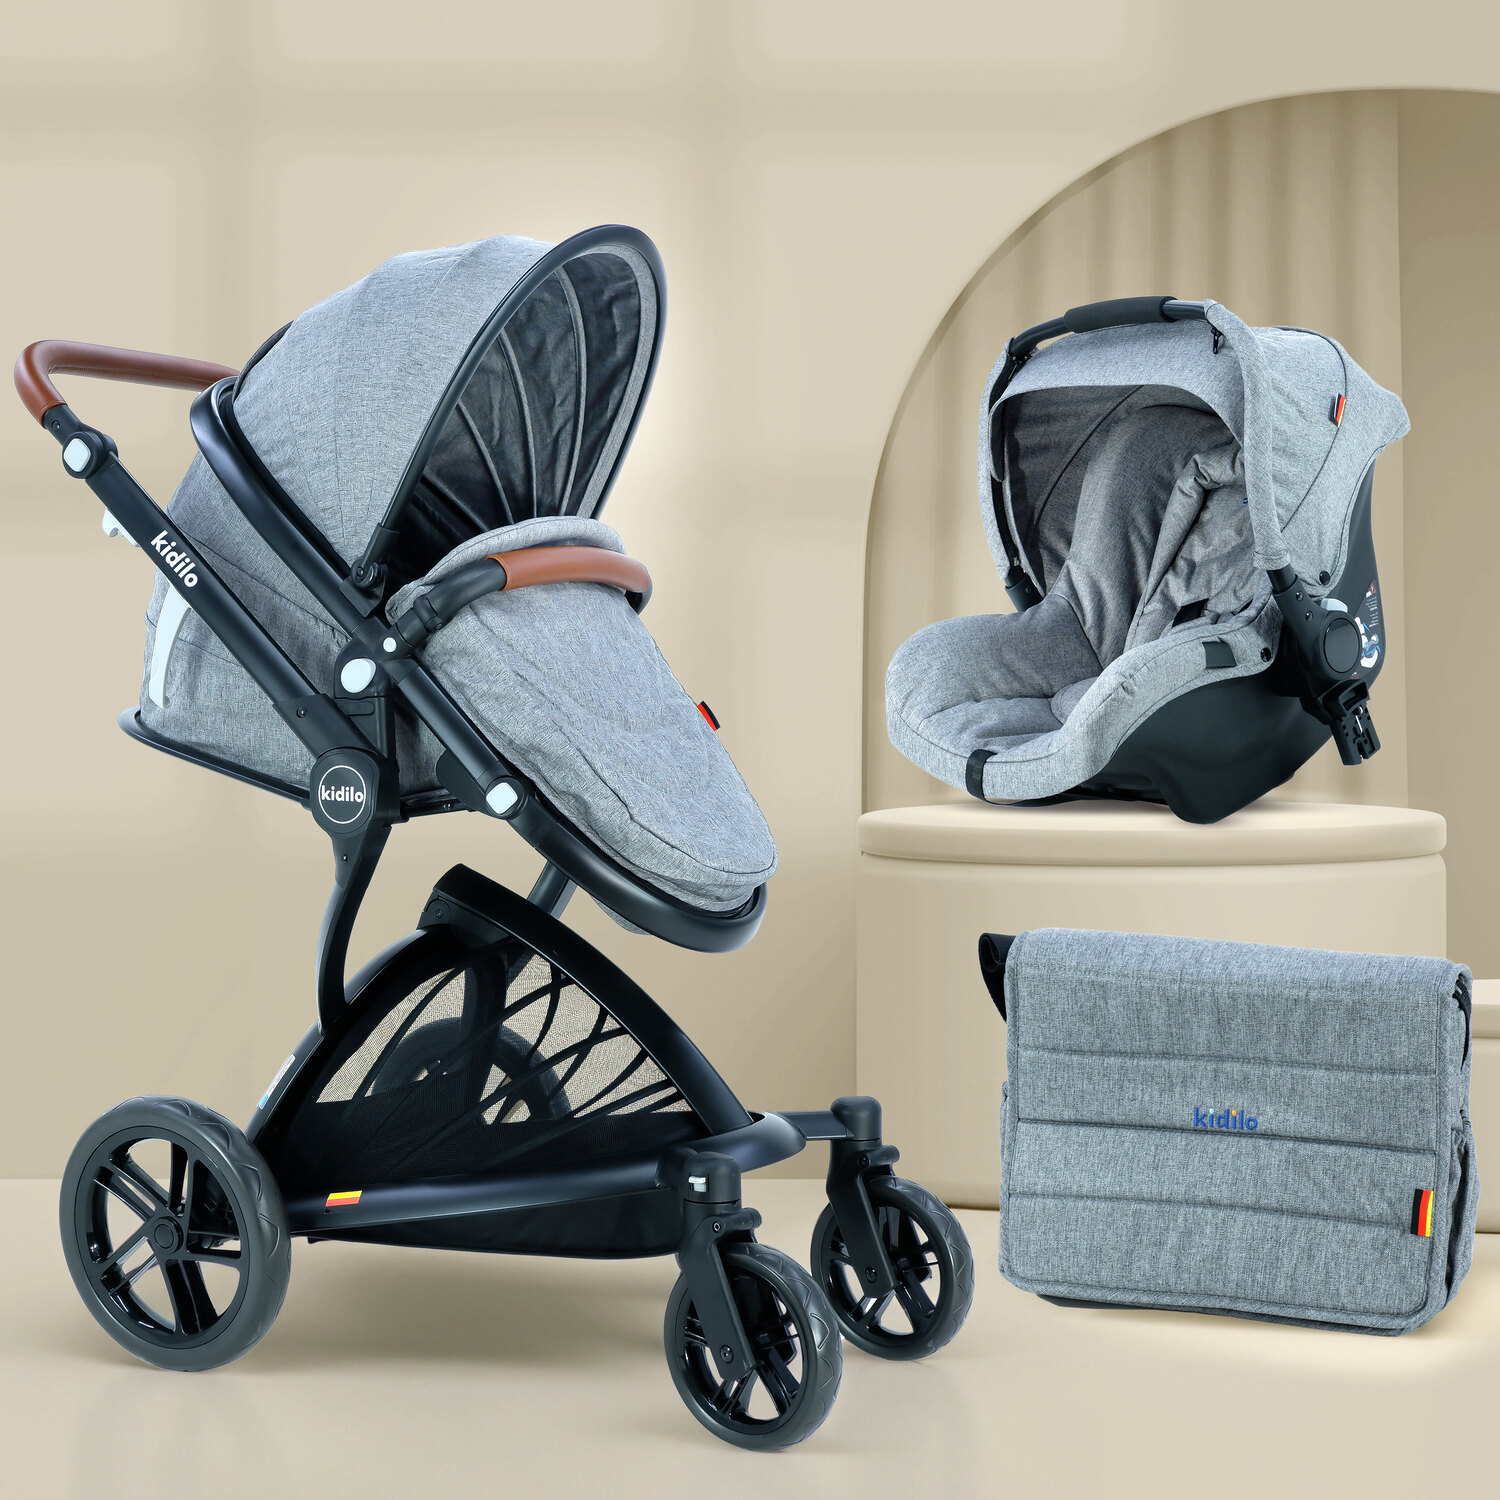 Stroller with Car Seat for Babies and Toddlers - Safe and Convenient Travel Solution for Ages 0 to 3 Years